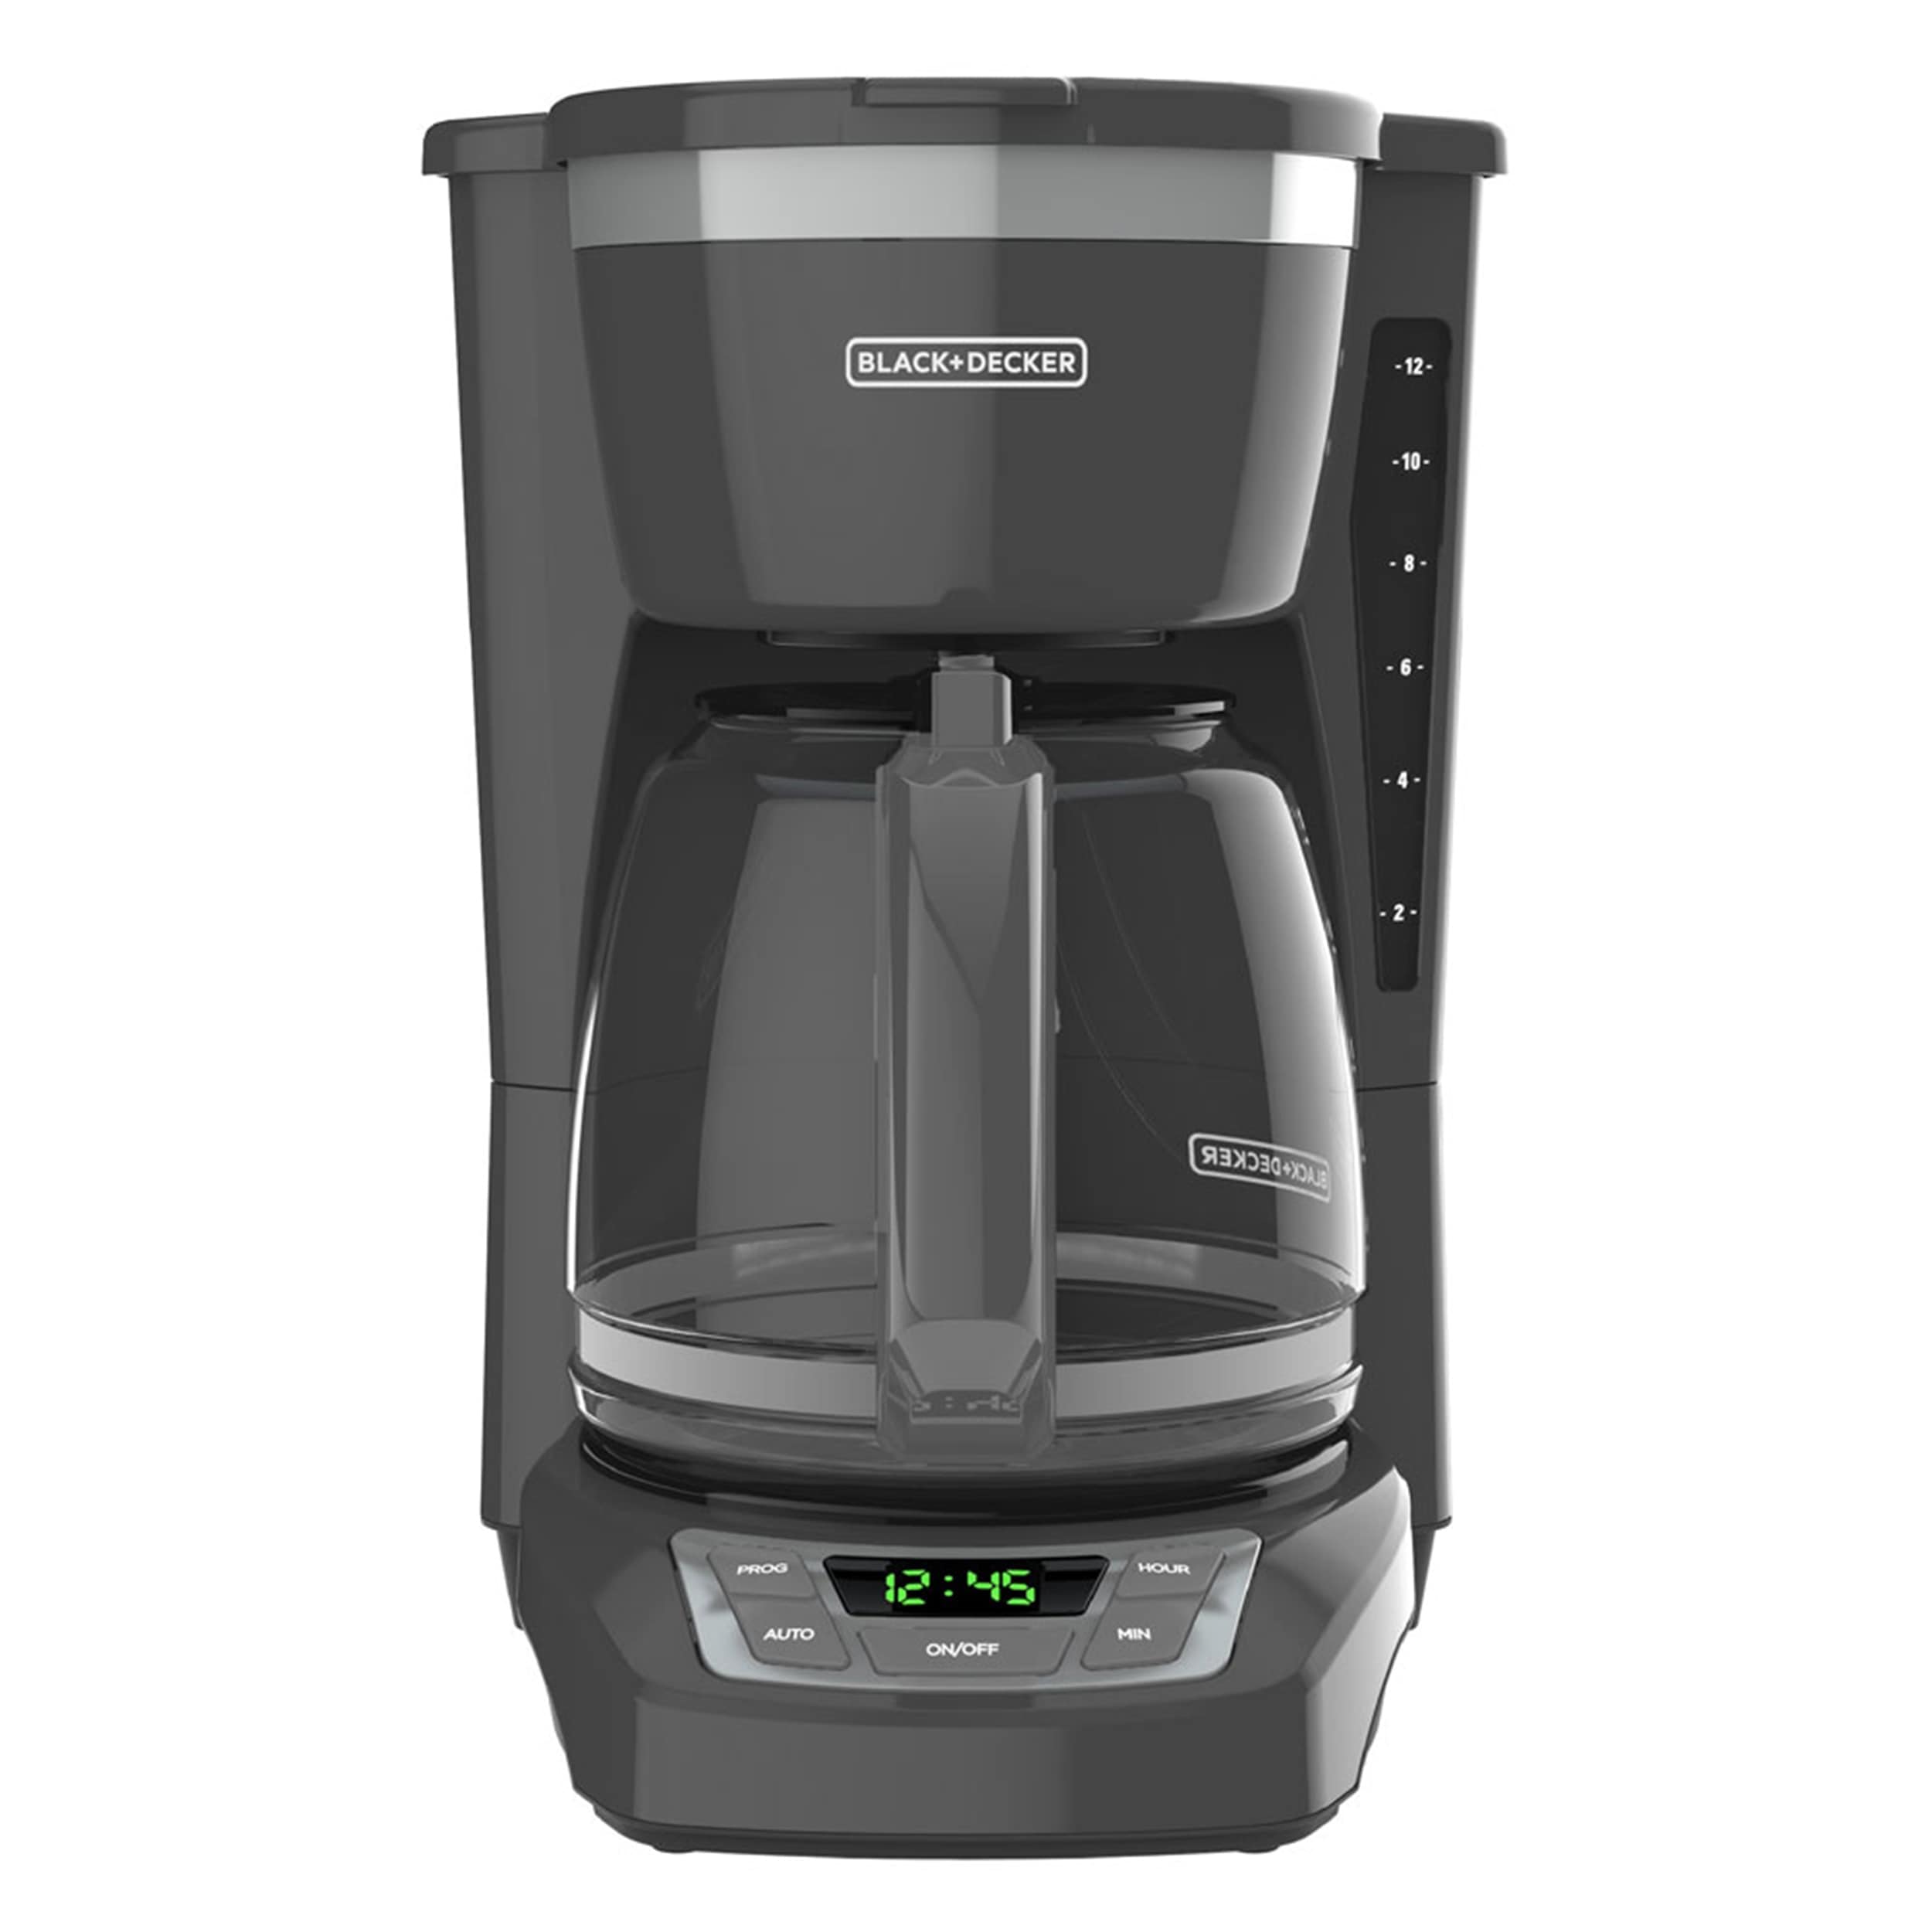 https://ak1.ostkcdn.com/images/products/is/images/direct/54d6c93c4658057e7d8f6692a9b98ea949cca754/Black-and-Decker-12-Cup-Programmable-Coffee-Maker-in-Gray.jpg